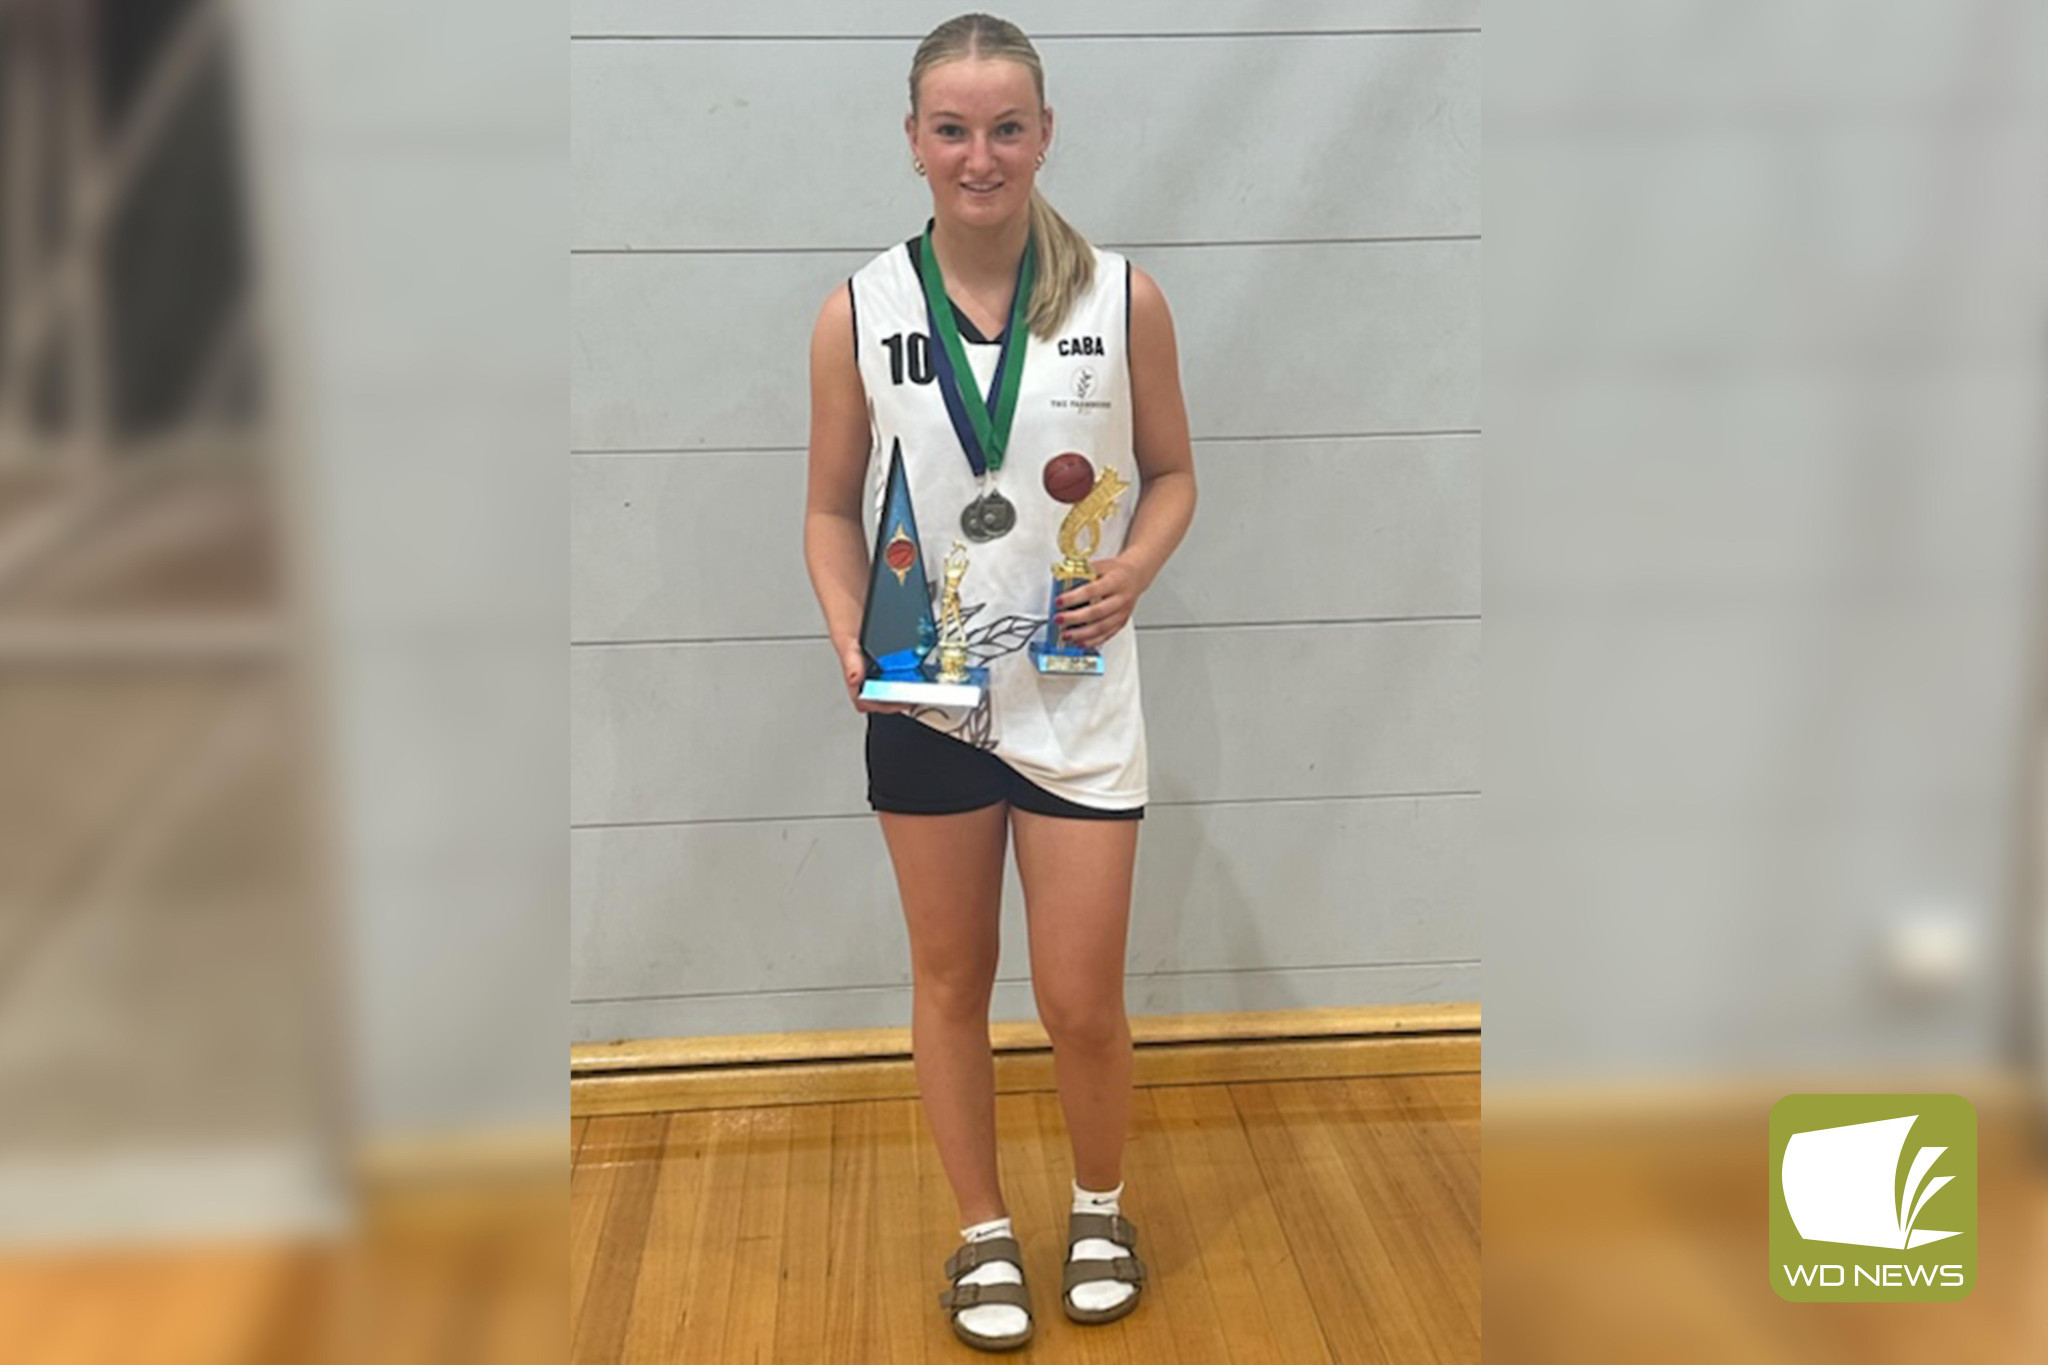 Camperdown’s Indiana Cameron has had a great season on the basketball courts across the district, bringing home three premierships and a swag of awards.